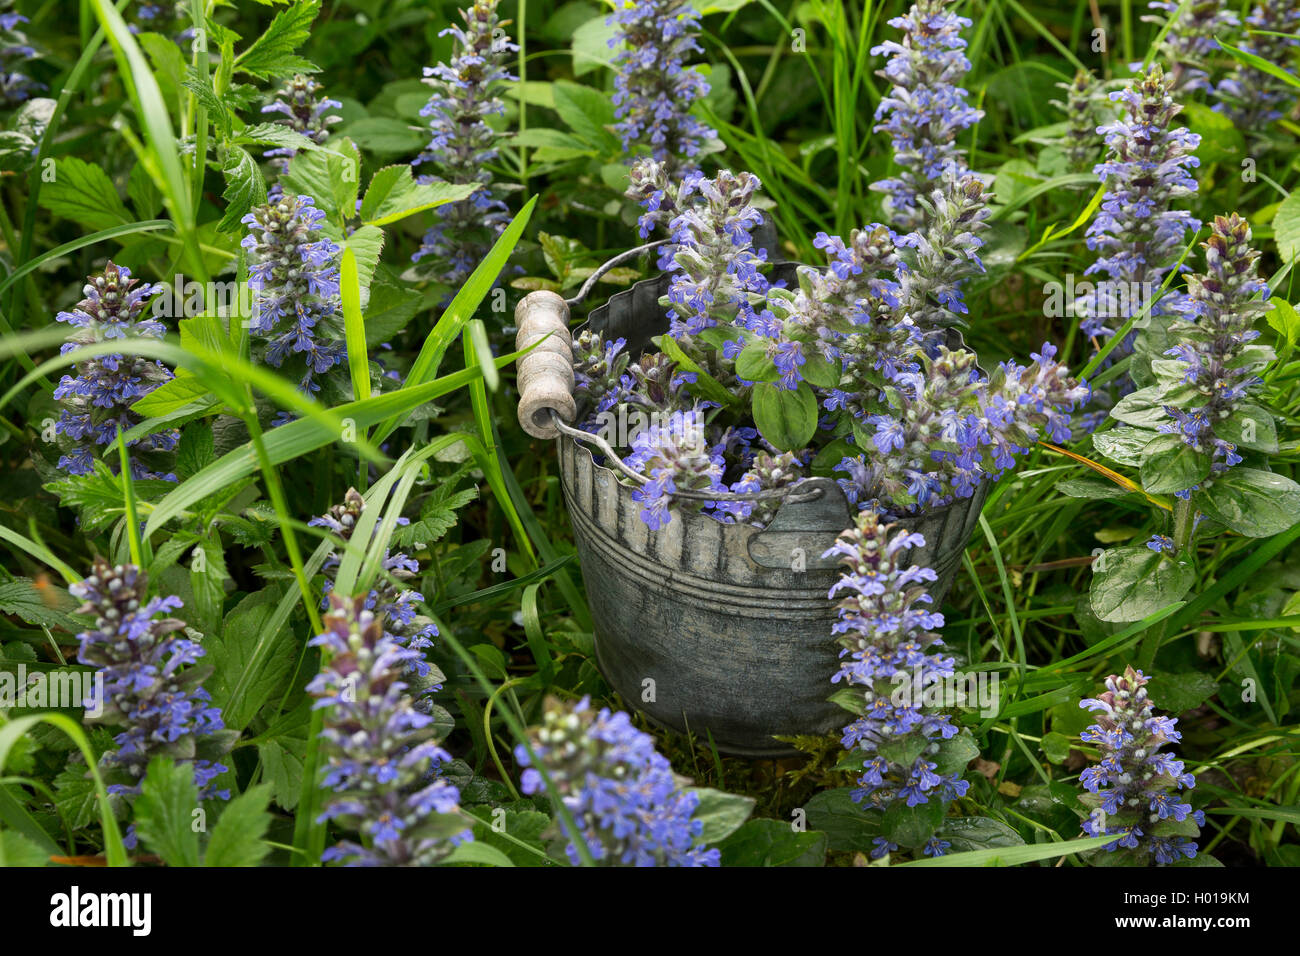 Common bugle, Creeping bugleweed (Ajuga reptans), collected flower, Germany Stock Photo